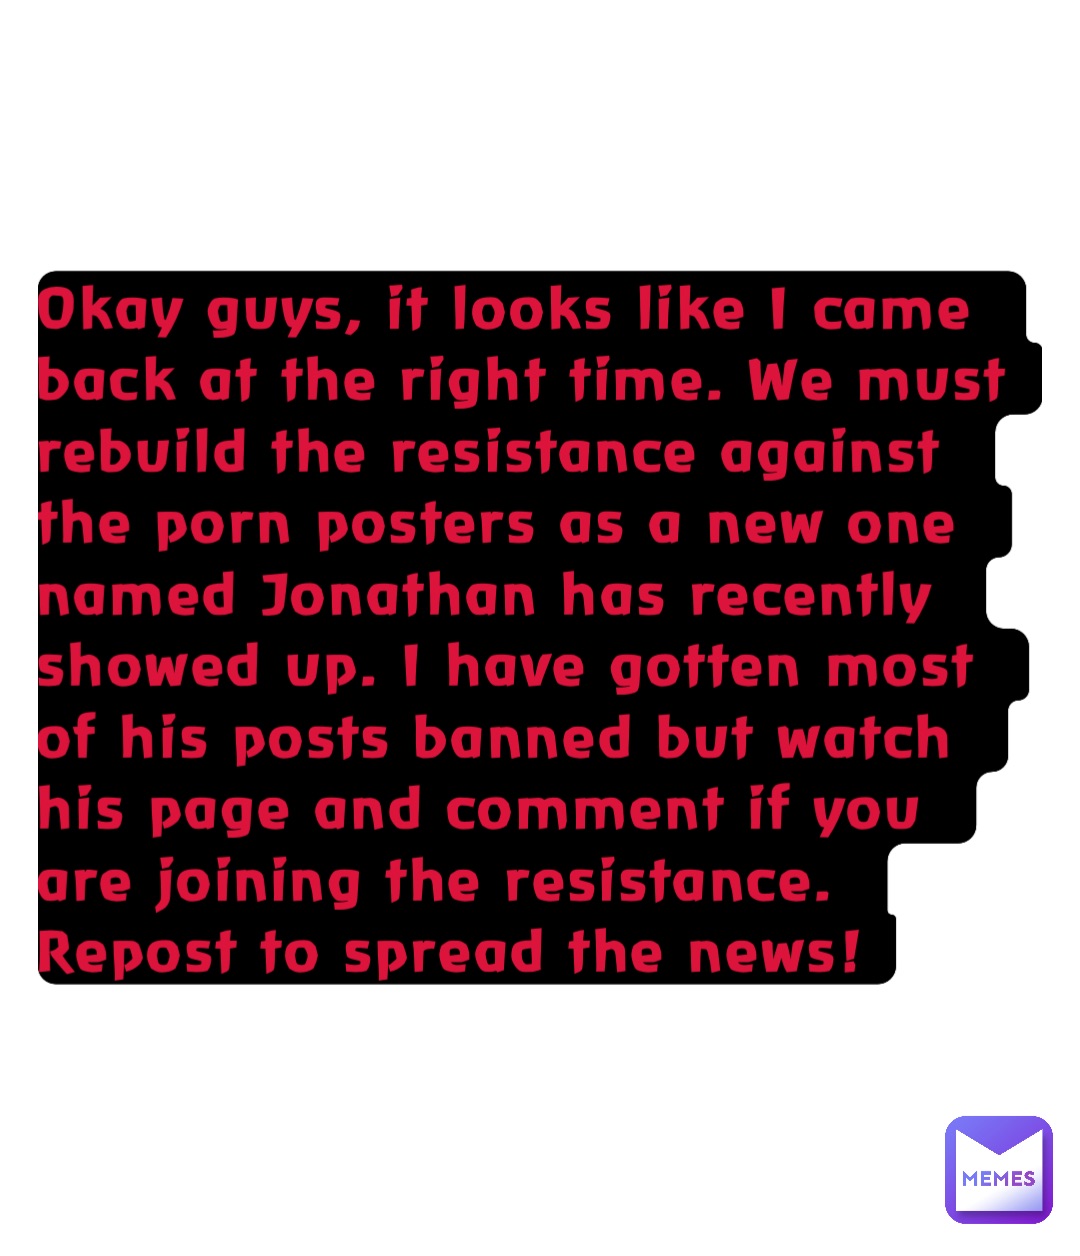 Okay guys, it looks like I came back at the right time. We must rebuild the resistance against the porn posters as a new one named Jonathan has recently showed up. I have gotten most of his posts banned but watch his page and comment if you are joining the resistance. Repost to spread the news!